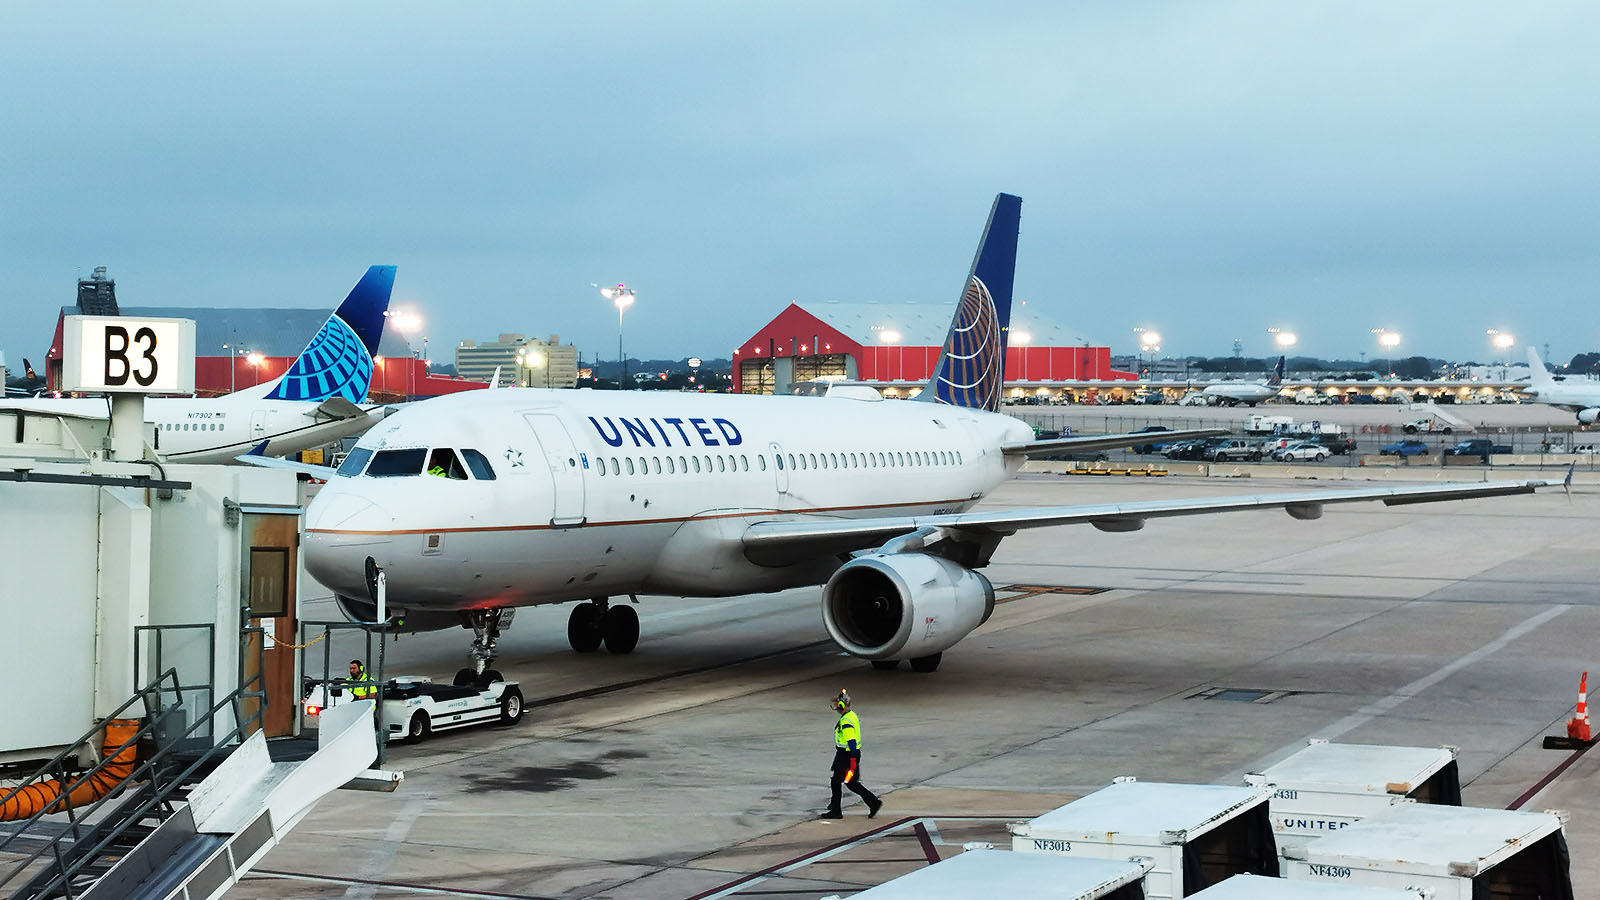 Airport view of United Airlines' Airbus A319 jet